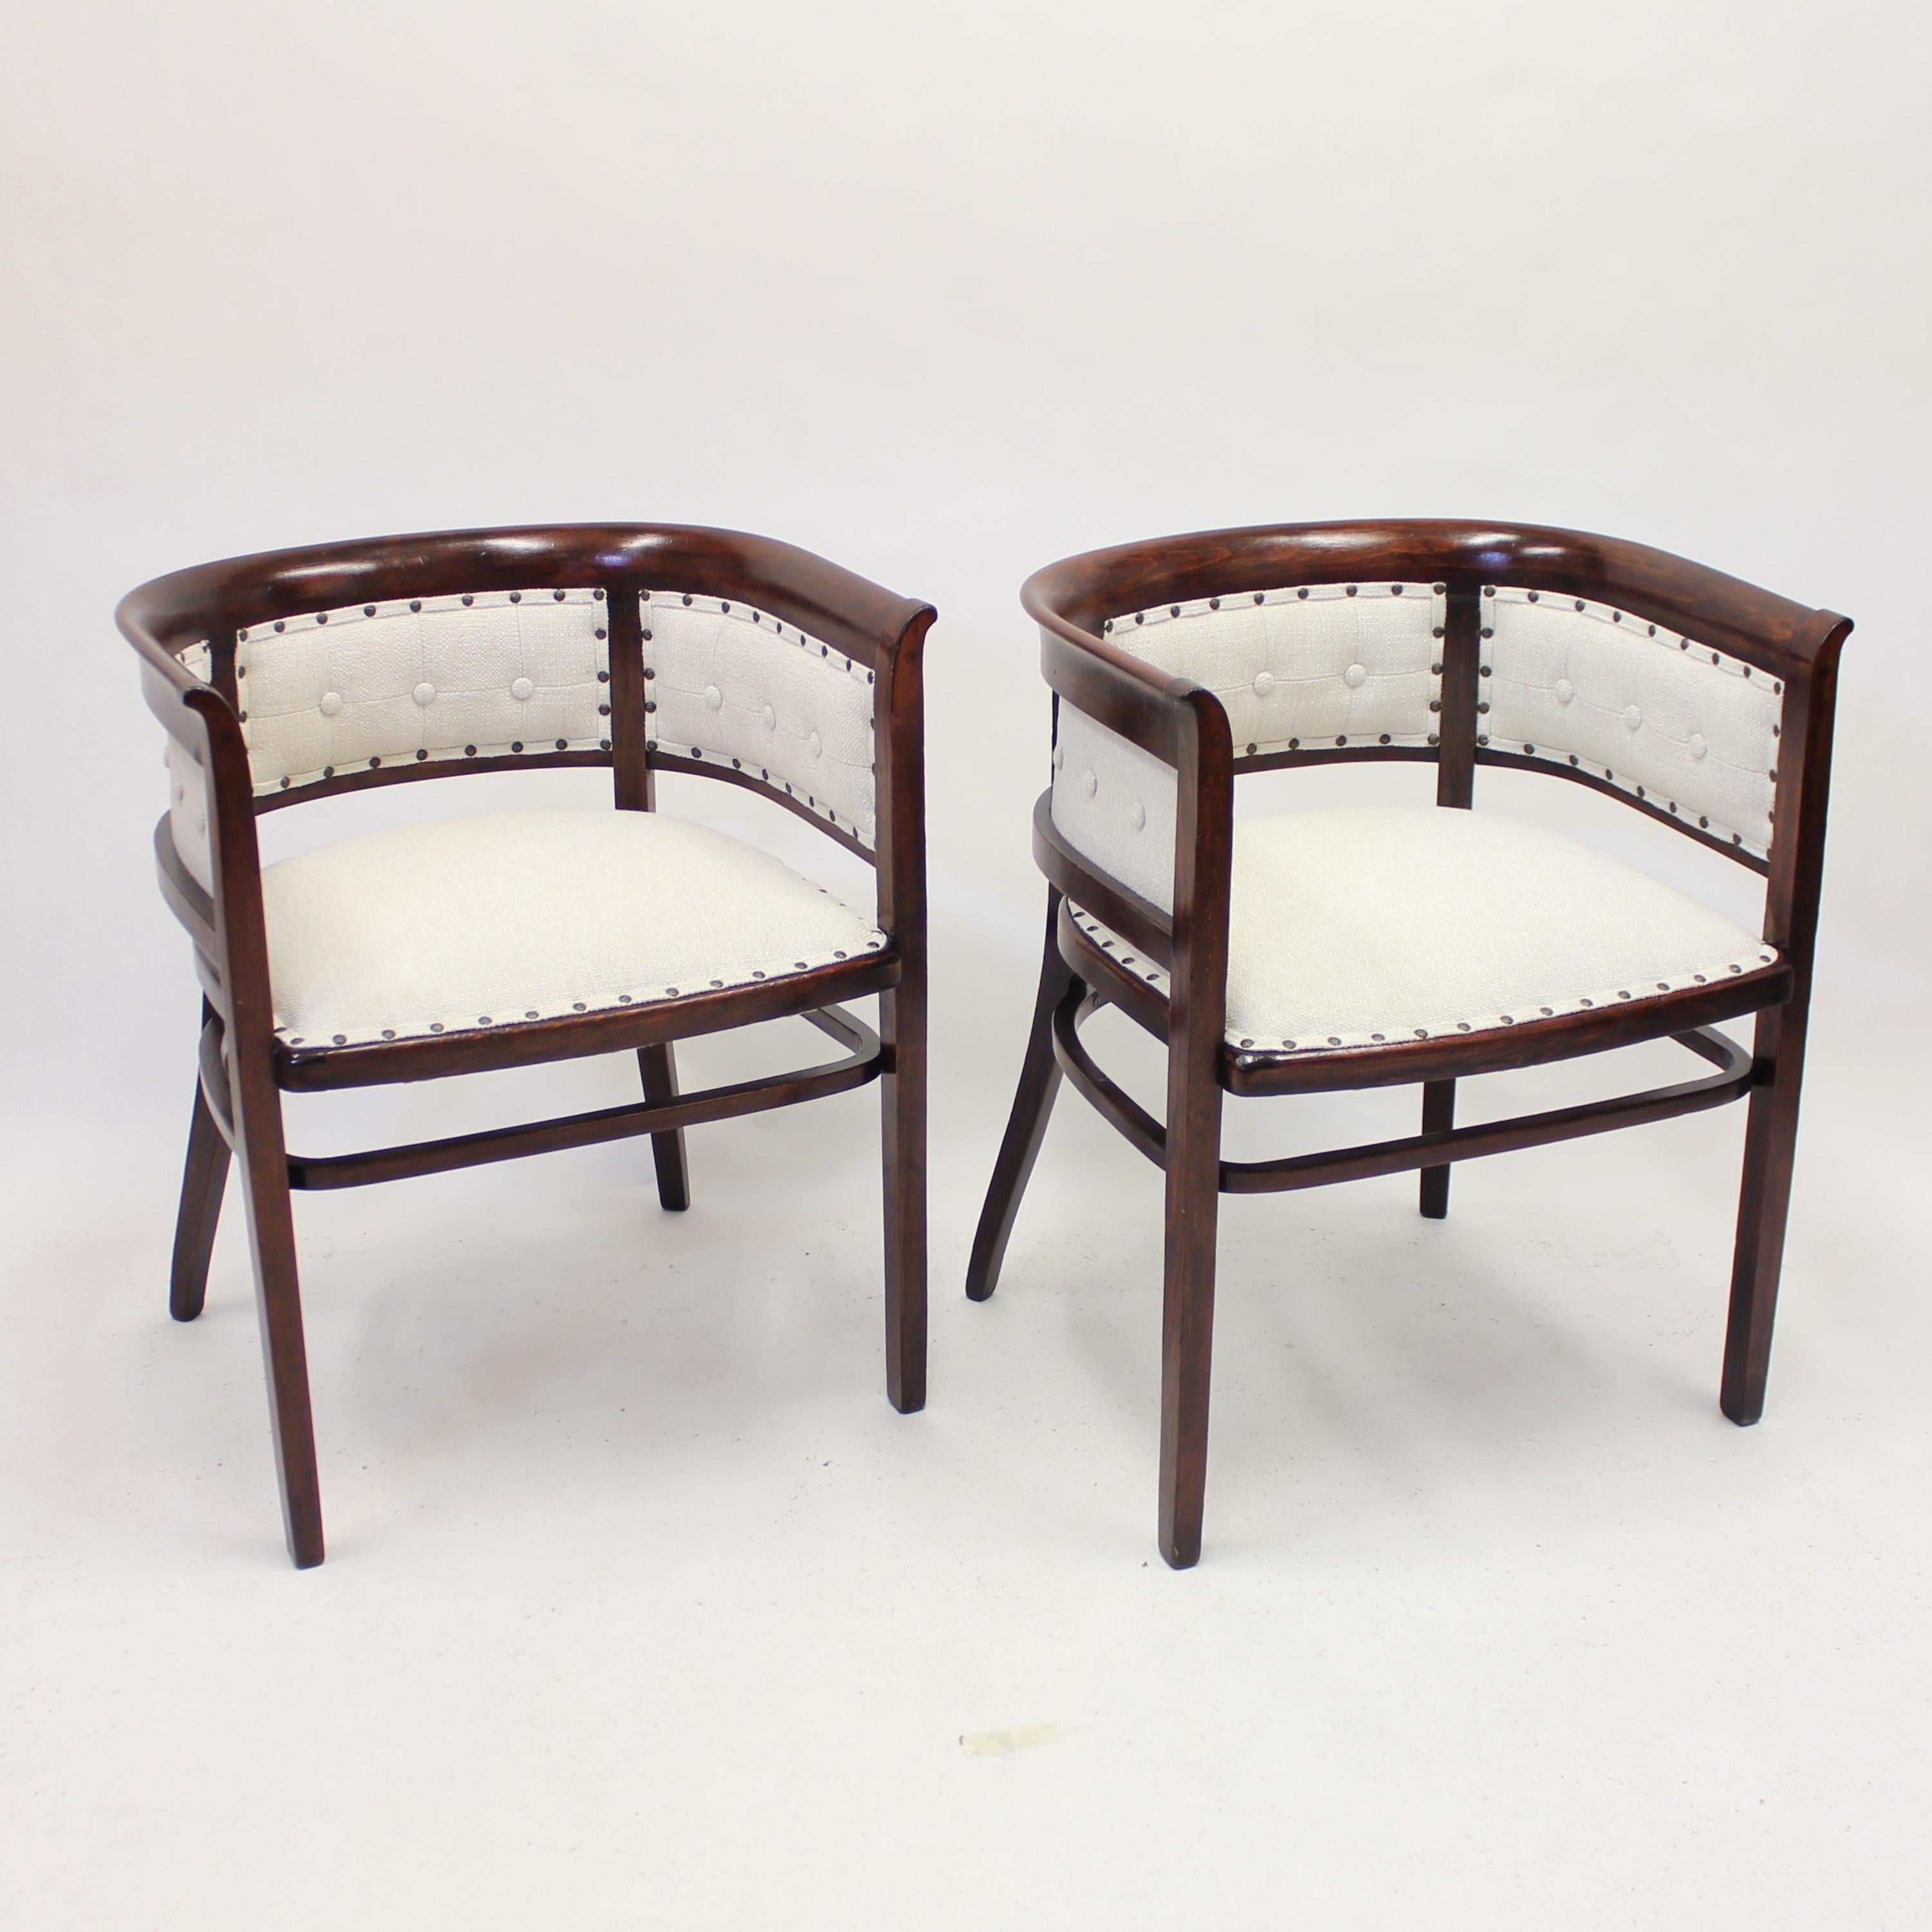 Czech Pair of Fischel Armchairs, in the Style of Josef Hoffmann, Early 20th Century